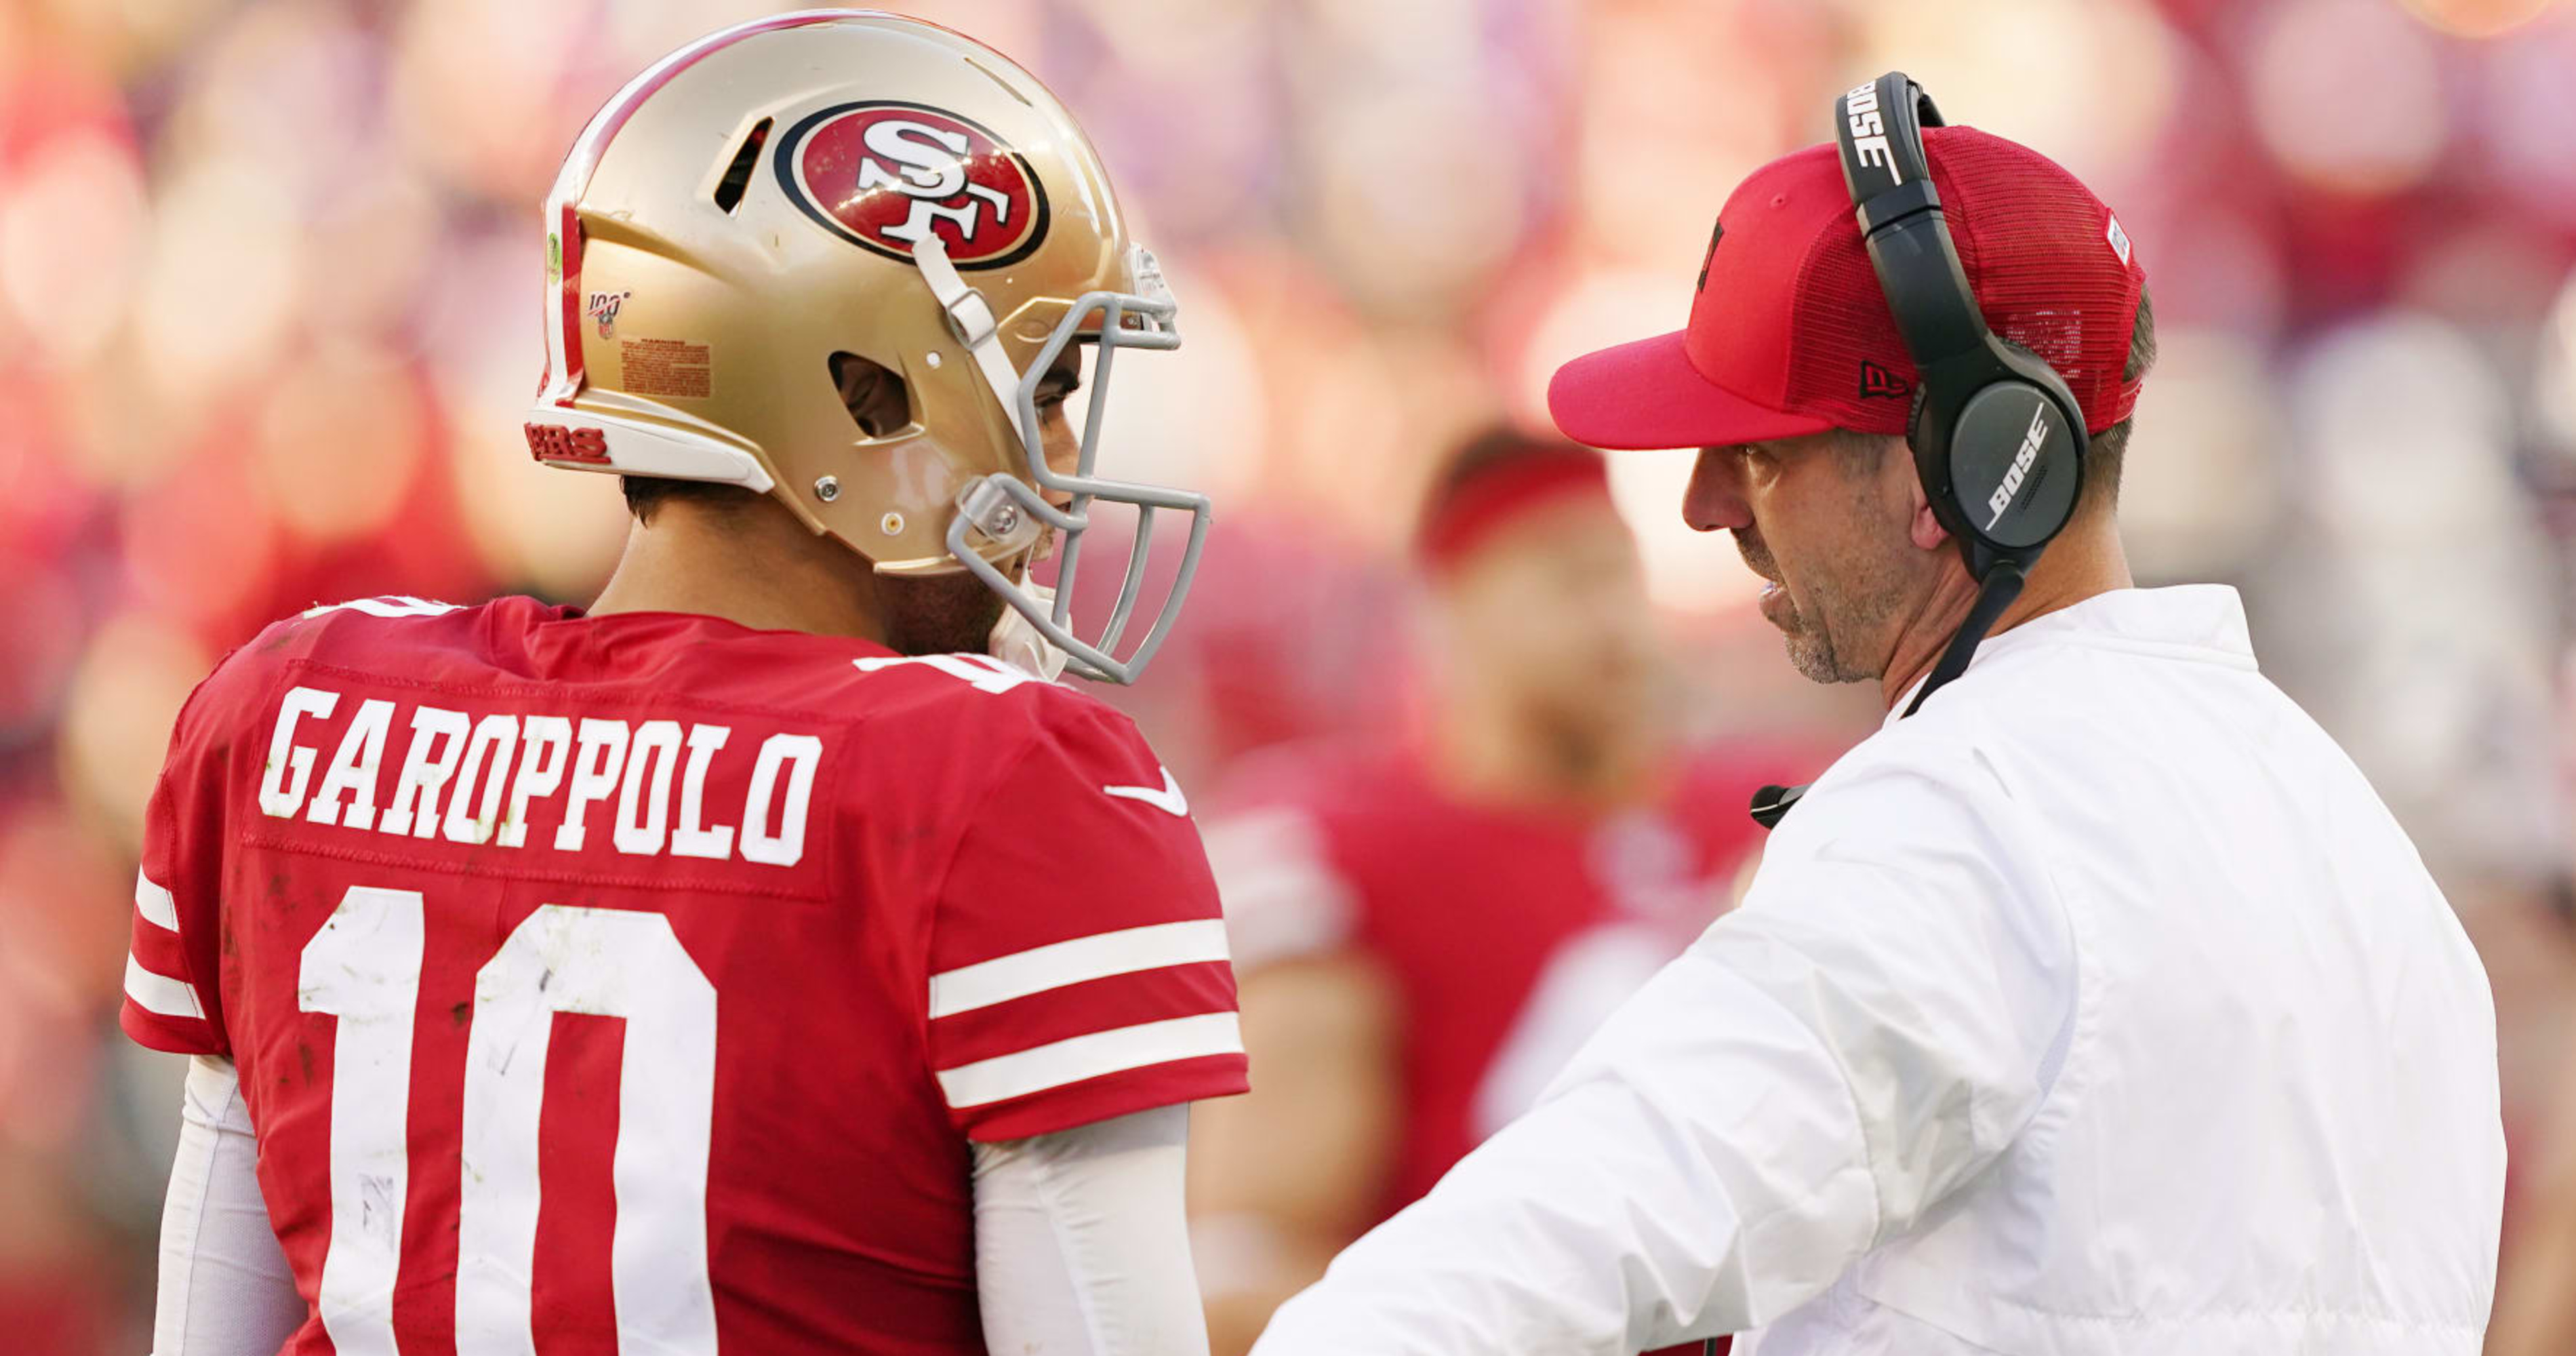 49ers News: Kyle Shanahan says today's 49ers don't appreciate the